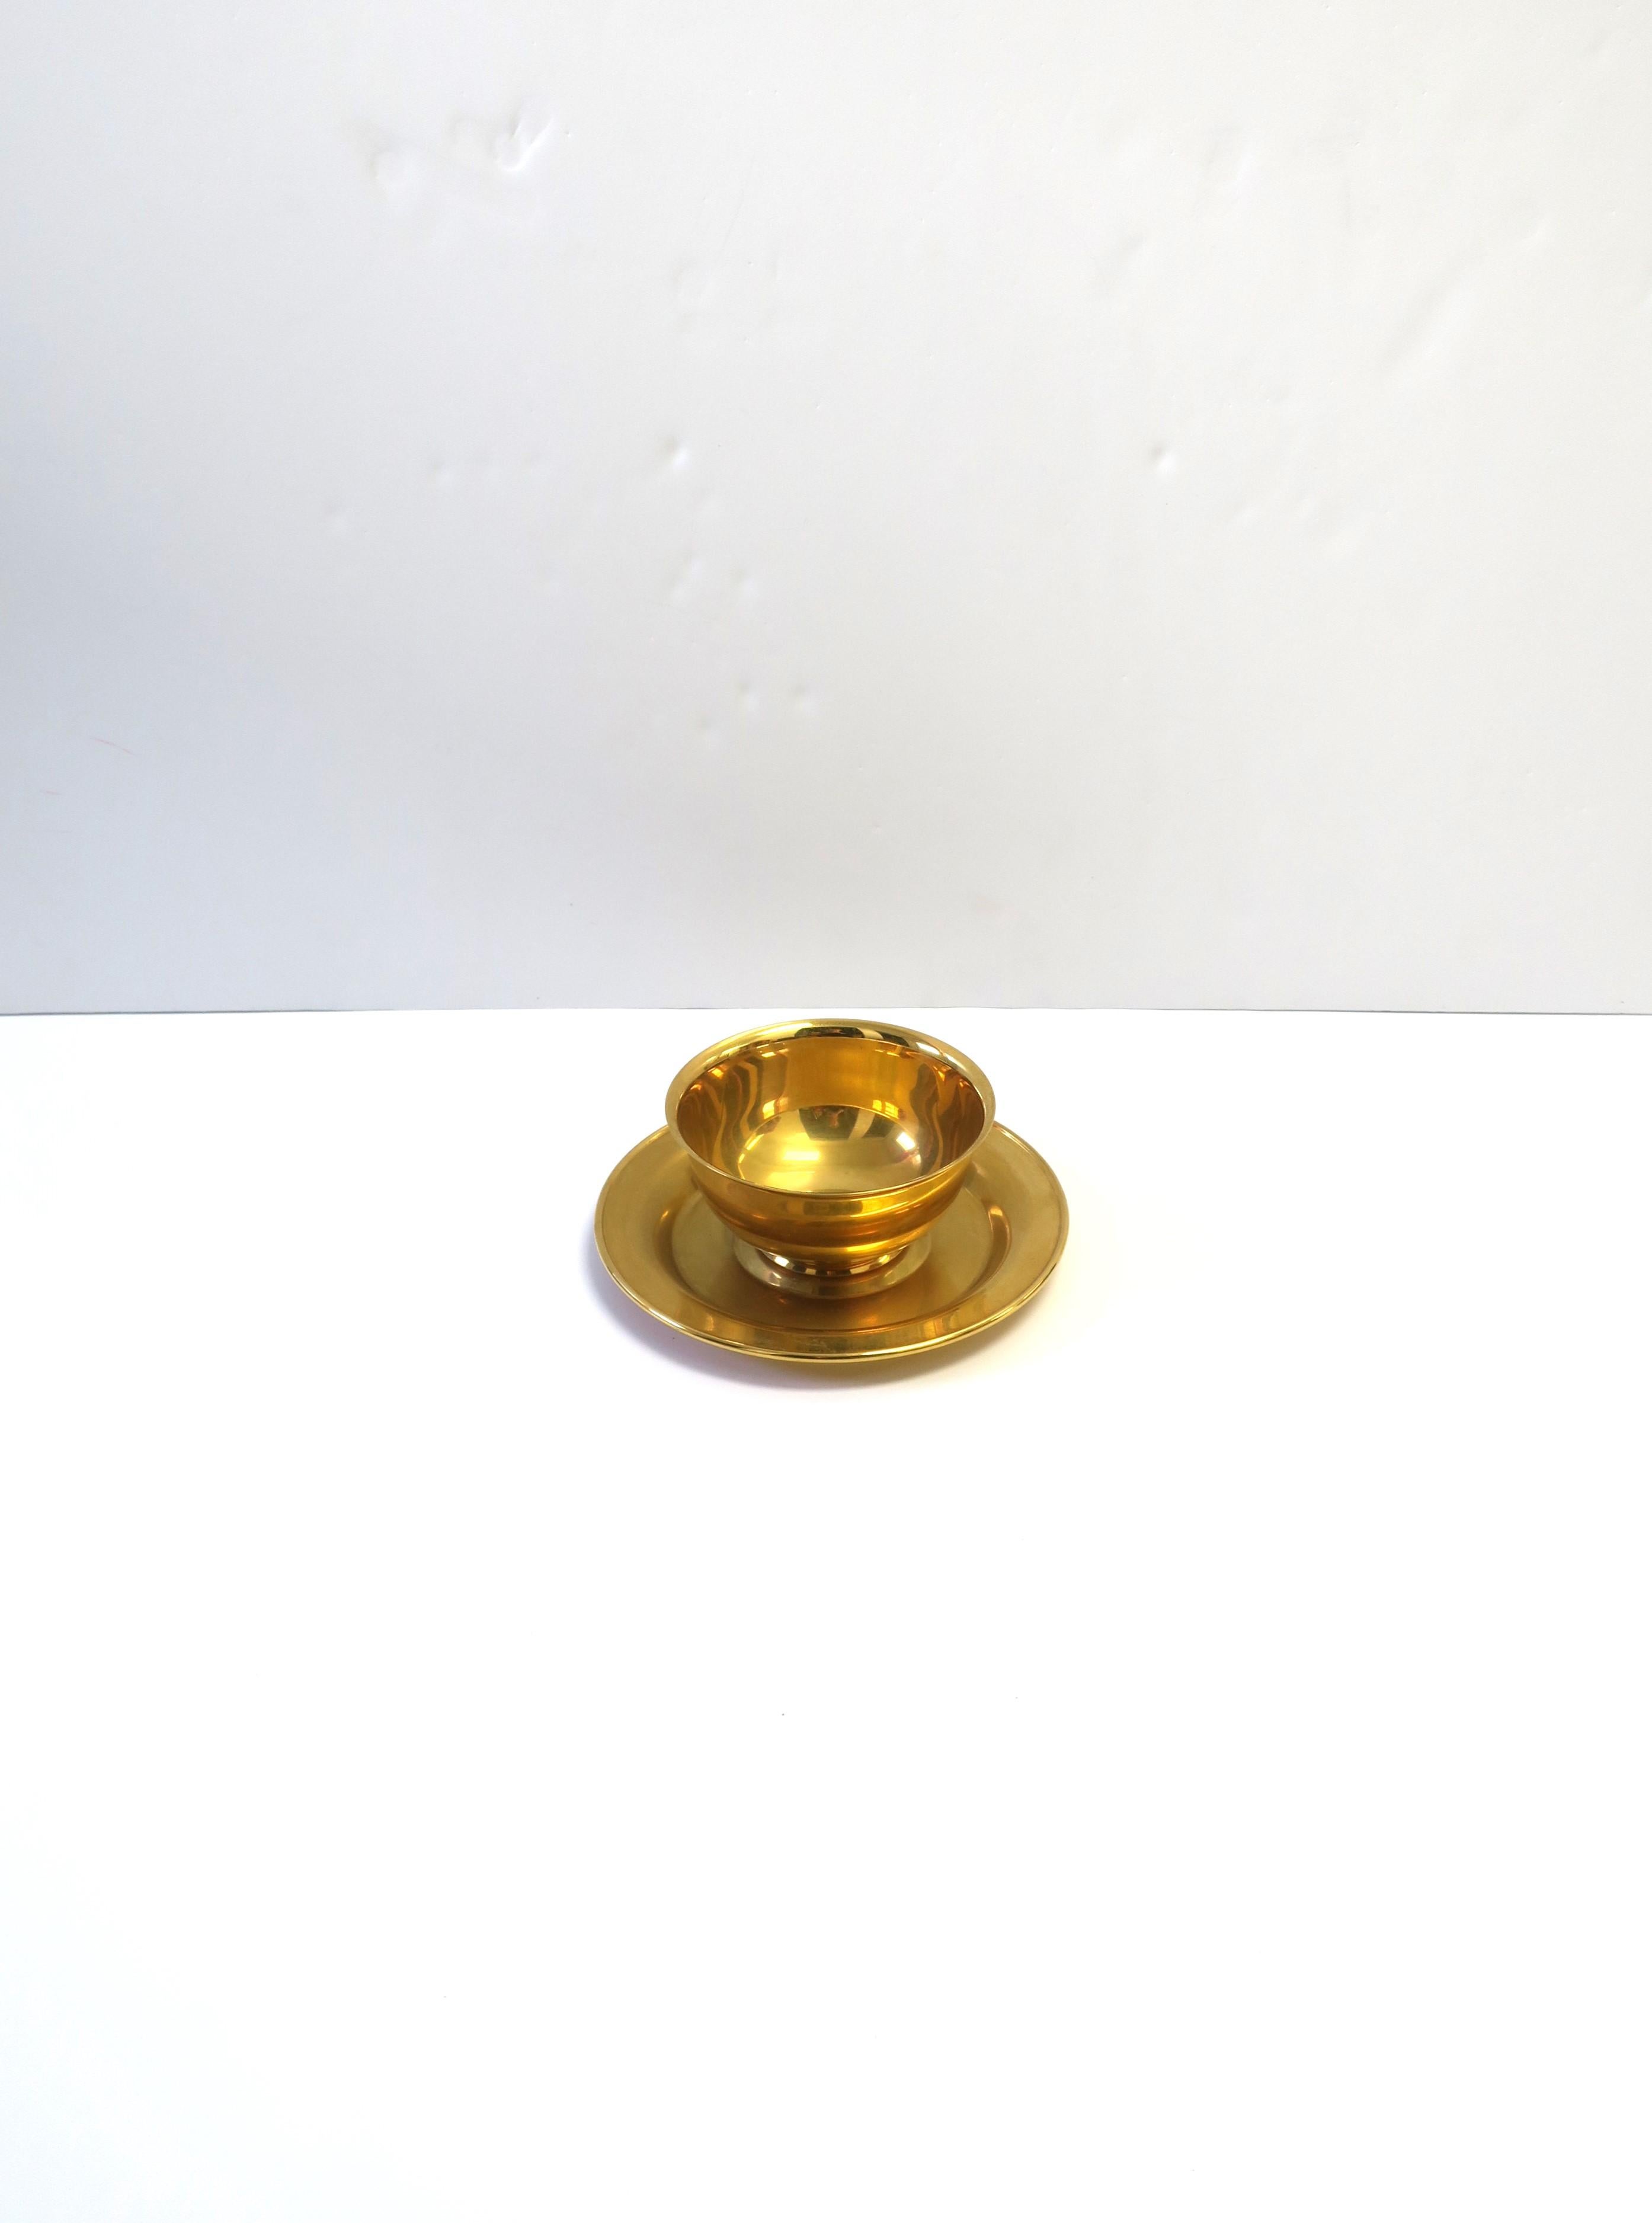 Gold Plated Revere Serving Bowl and Underplate Saucer For Sale 2